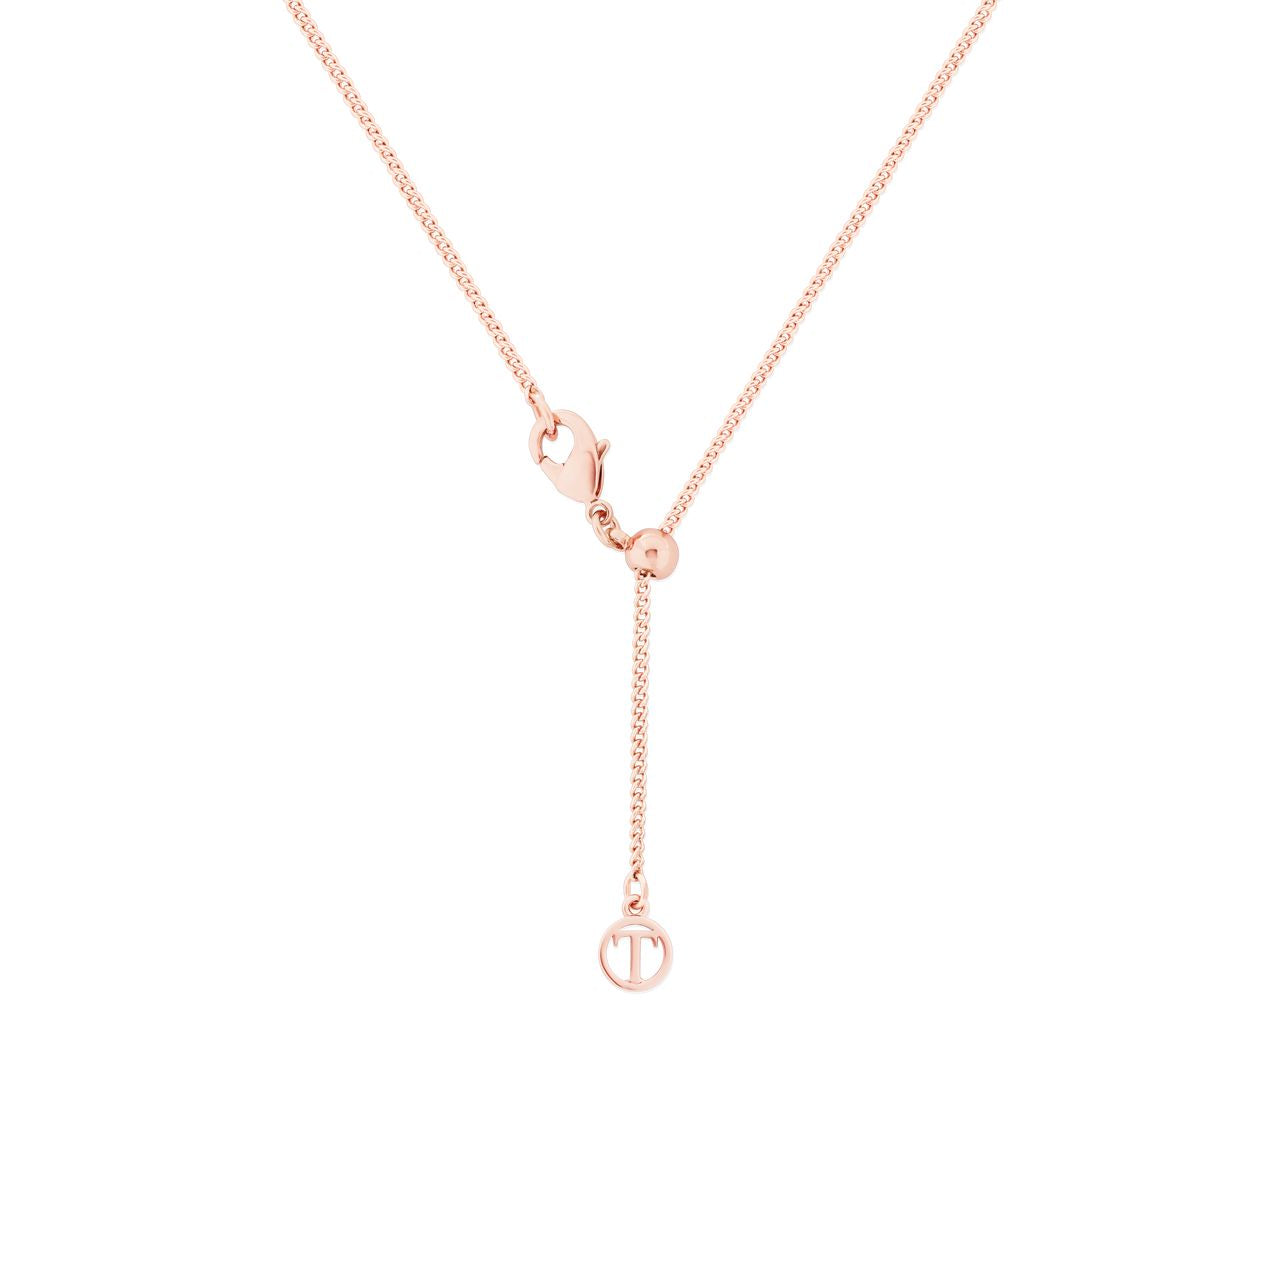 Tipperary Crystal Tree of Life & Pink Heart CZ Rose Gold Pendant  The tree of life is a symbol of a fresh start on life, positive energy, good health and a bright future. The symbolism of the Tree of Life is ultimately about the forces of nature combining to create balance and harmony.